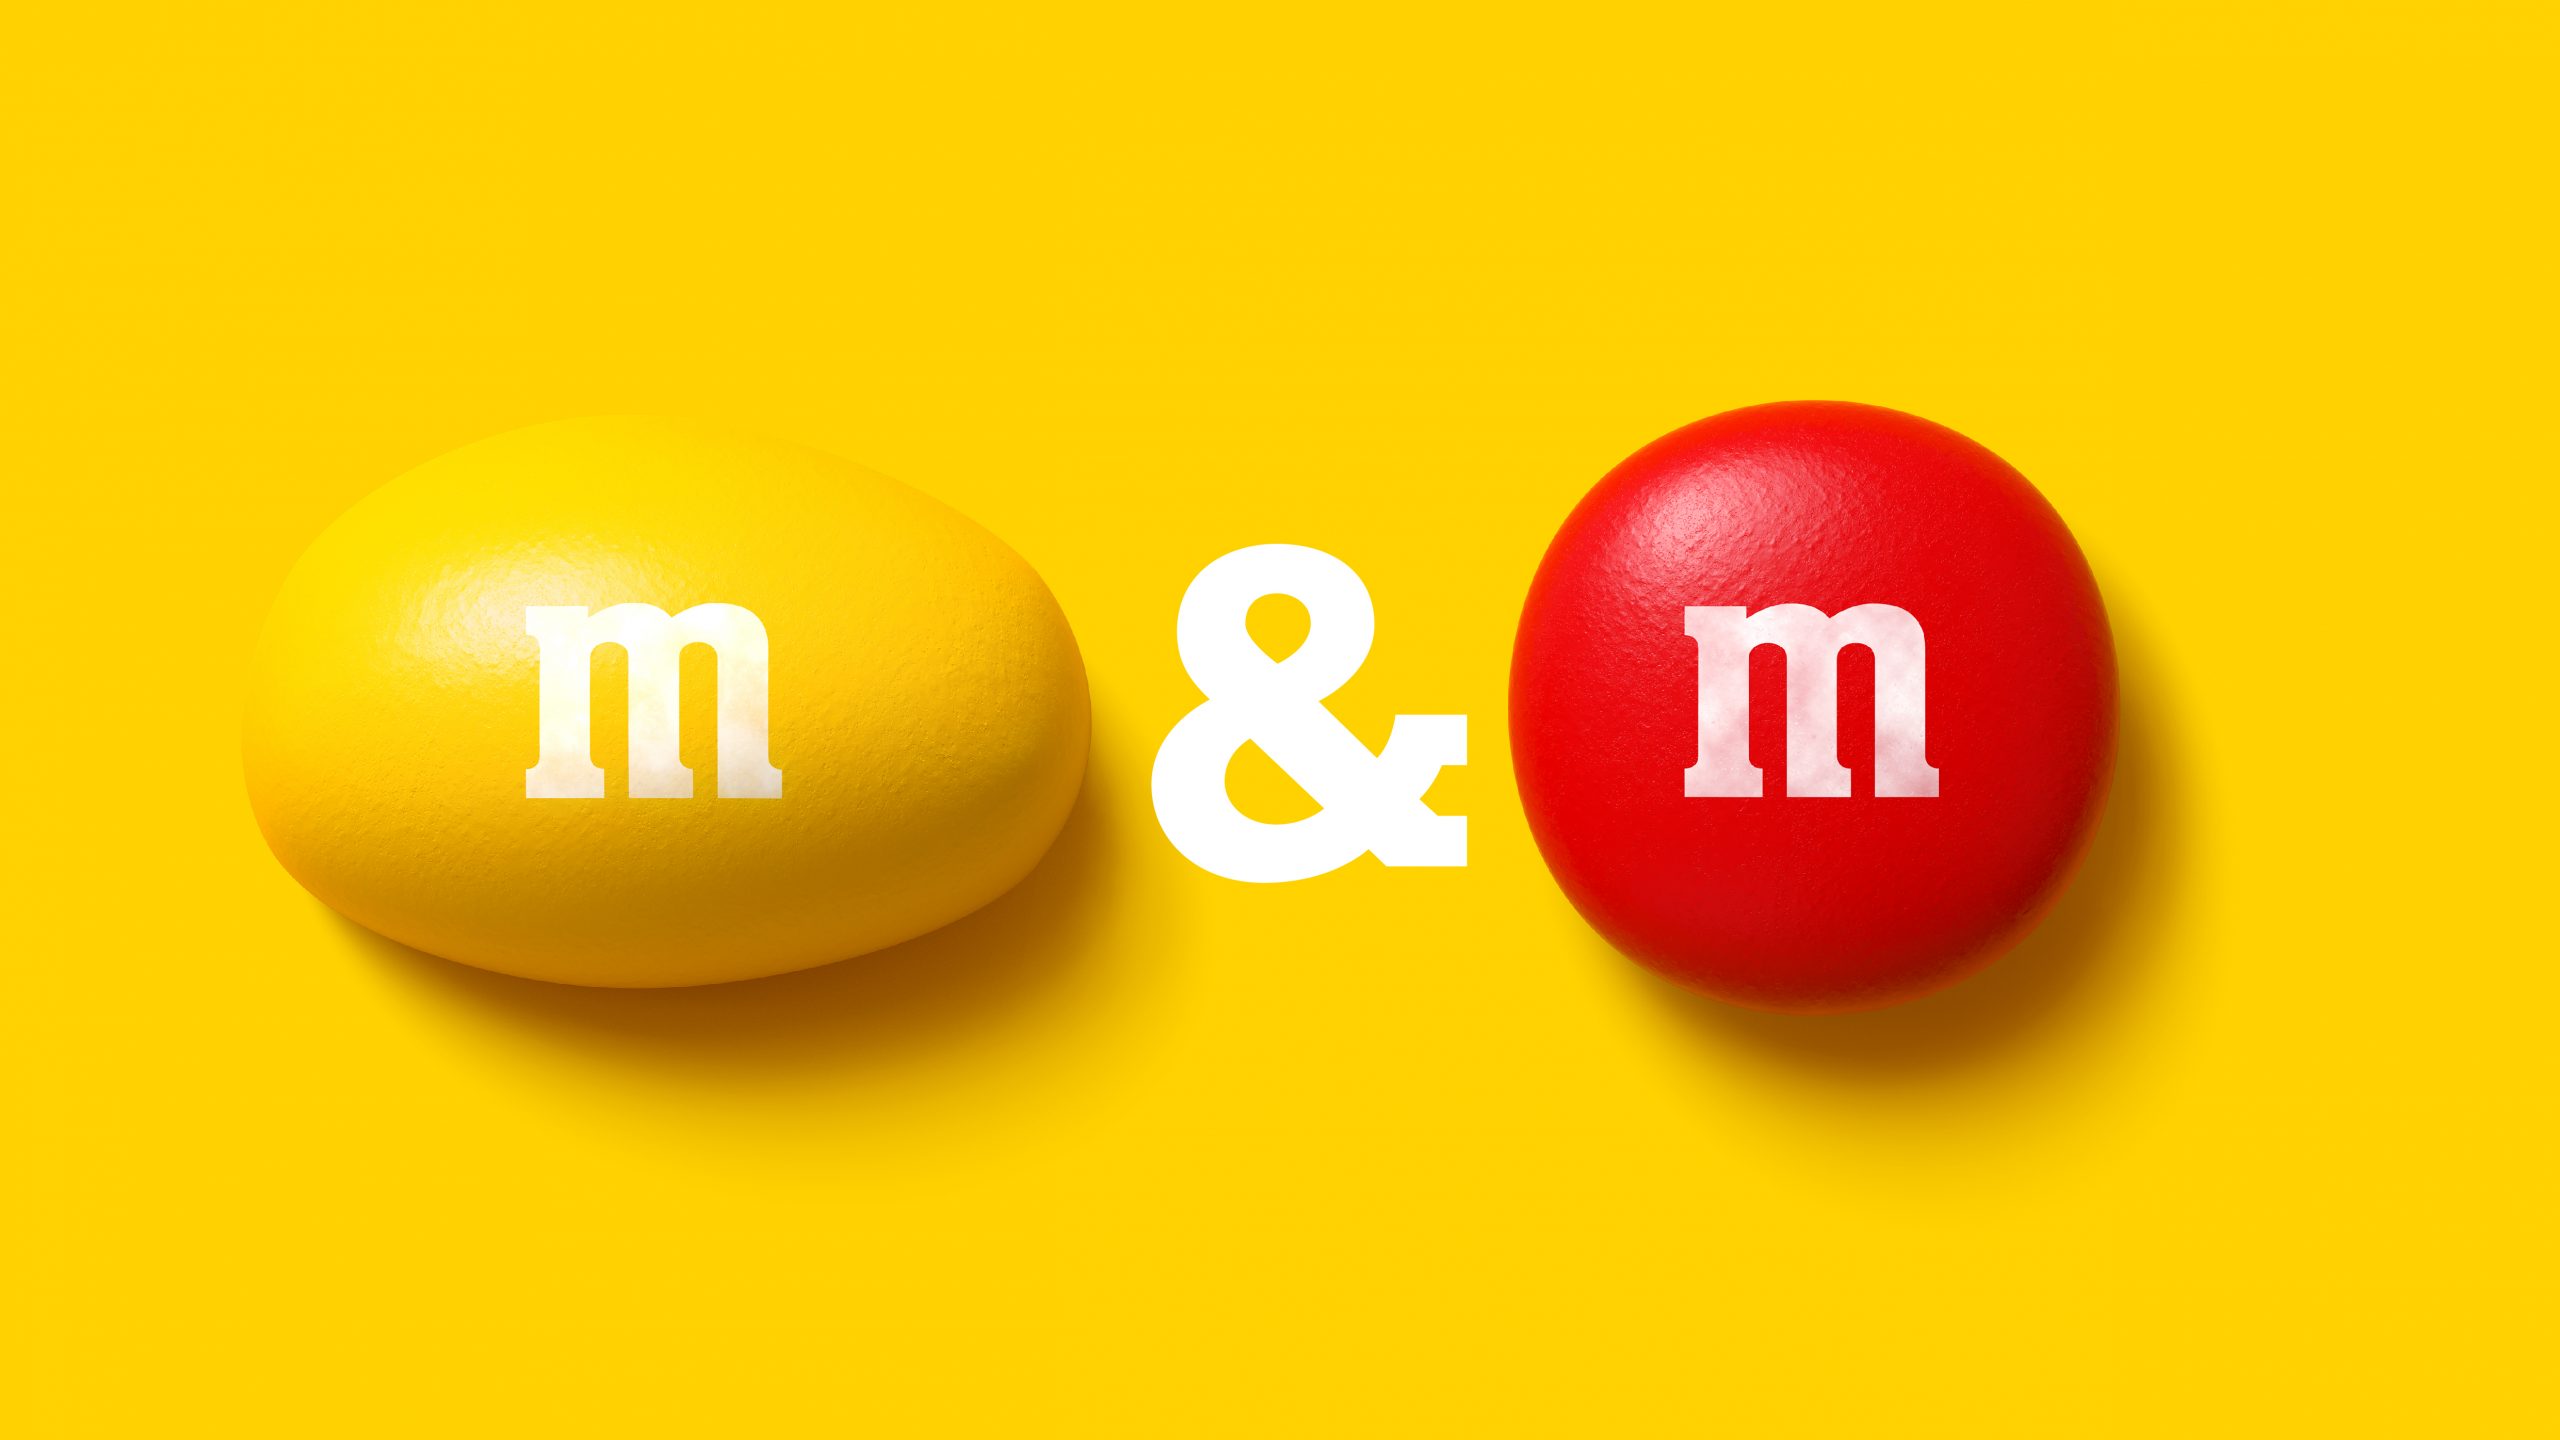 Dieline: M&M’S Rolls Out Its Global Redesign From JKR, and It’s All About the Ampersand